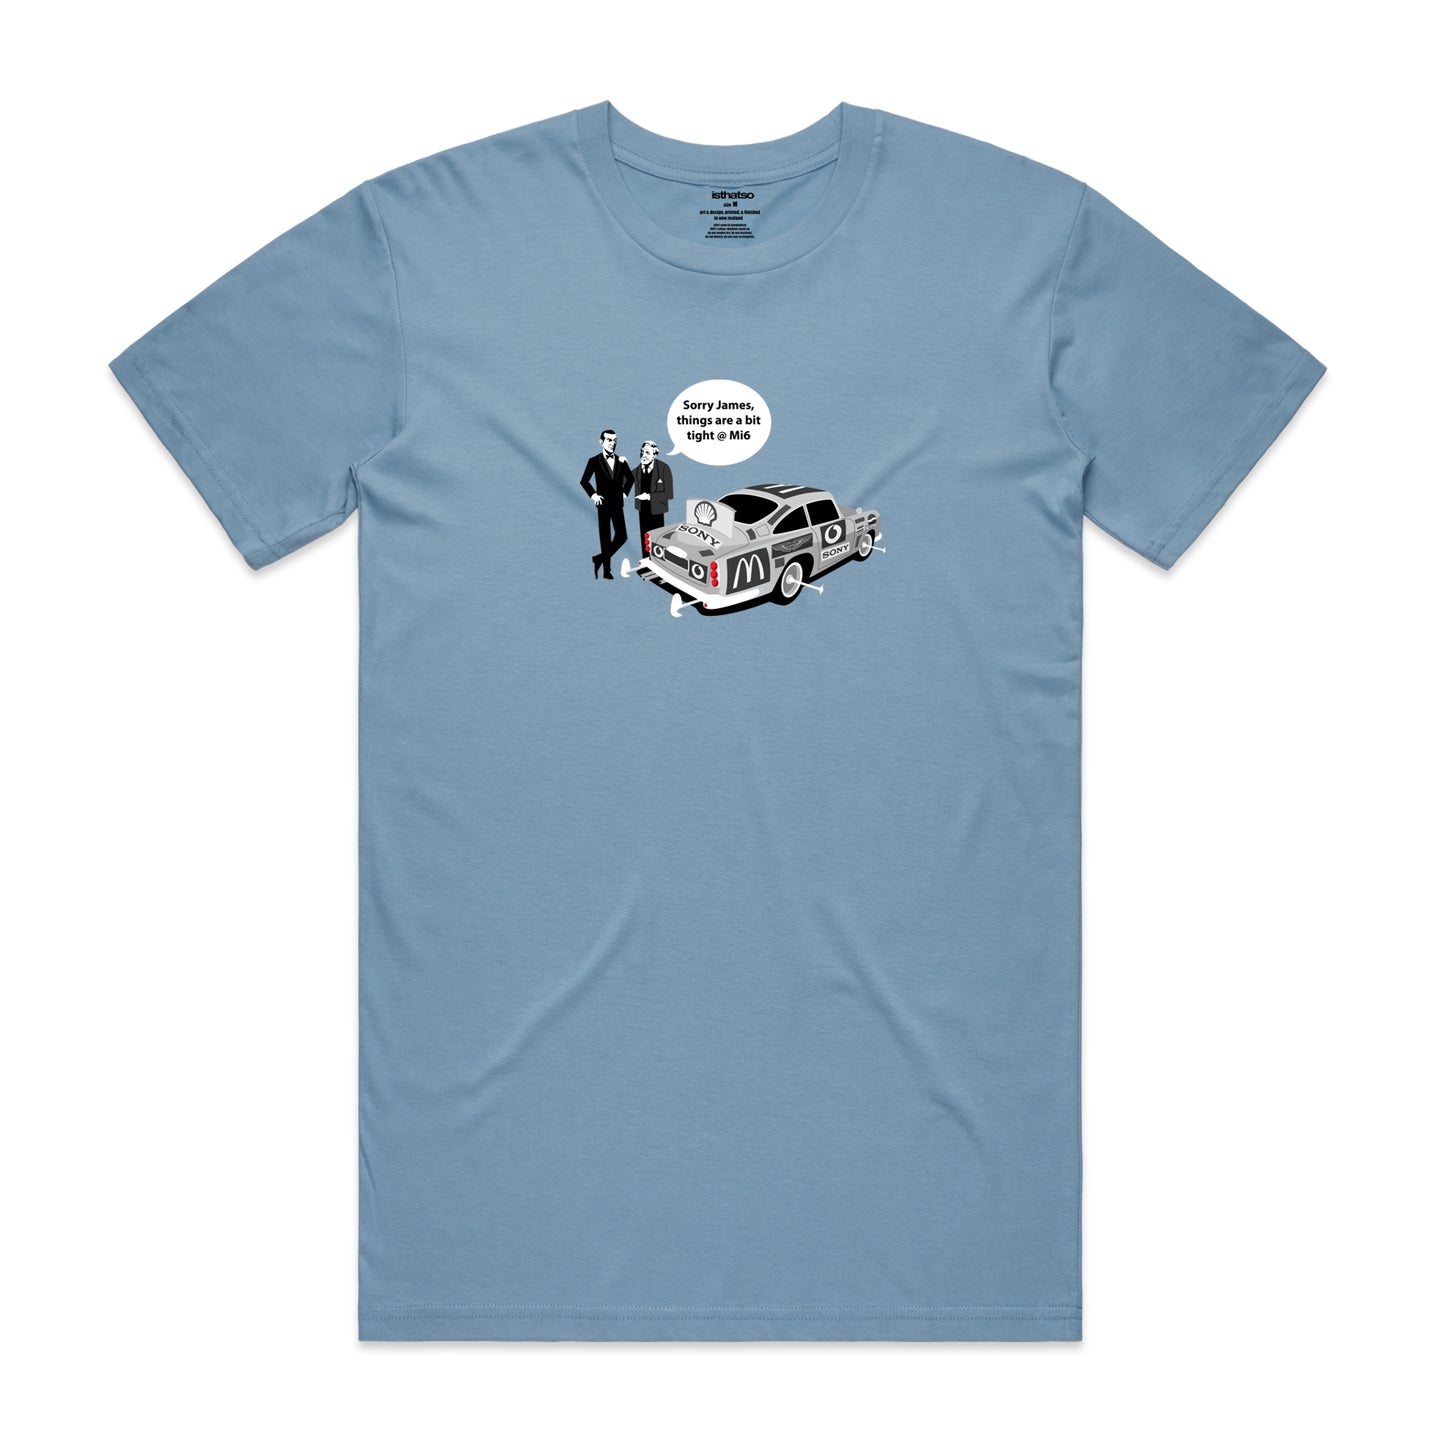 Isthatso Cotton Graphic T Shirt - Sorry James - Blue